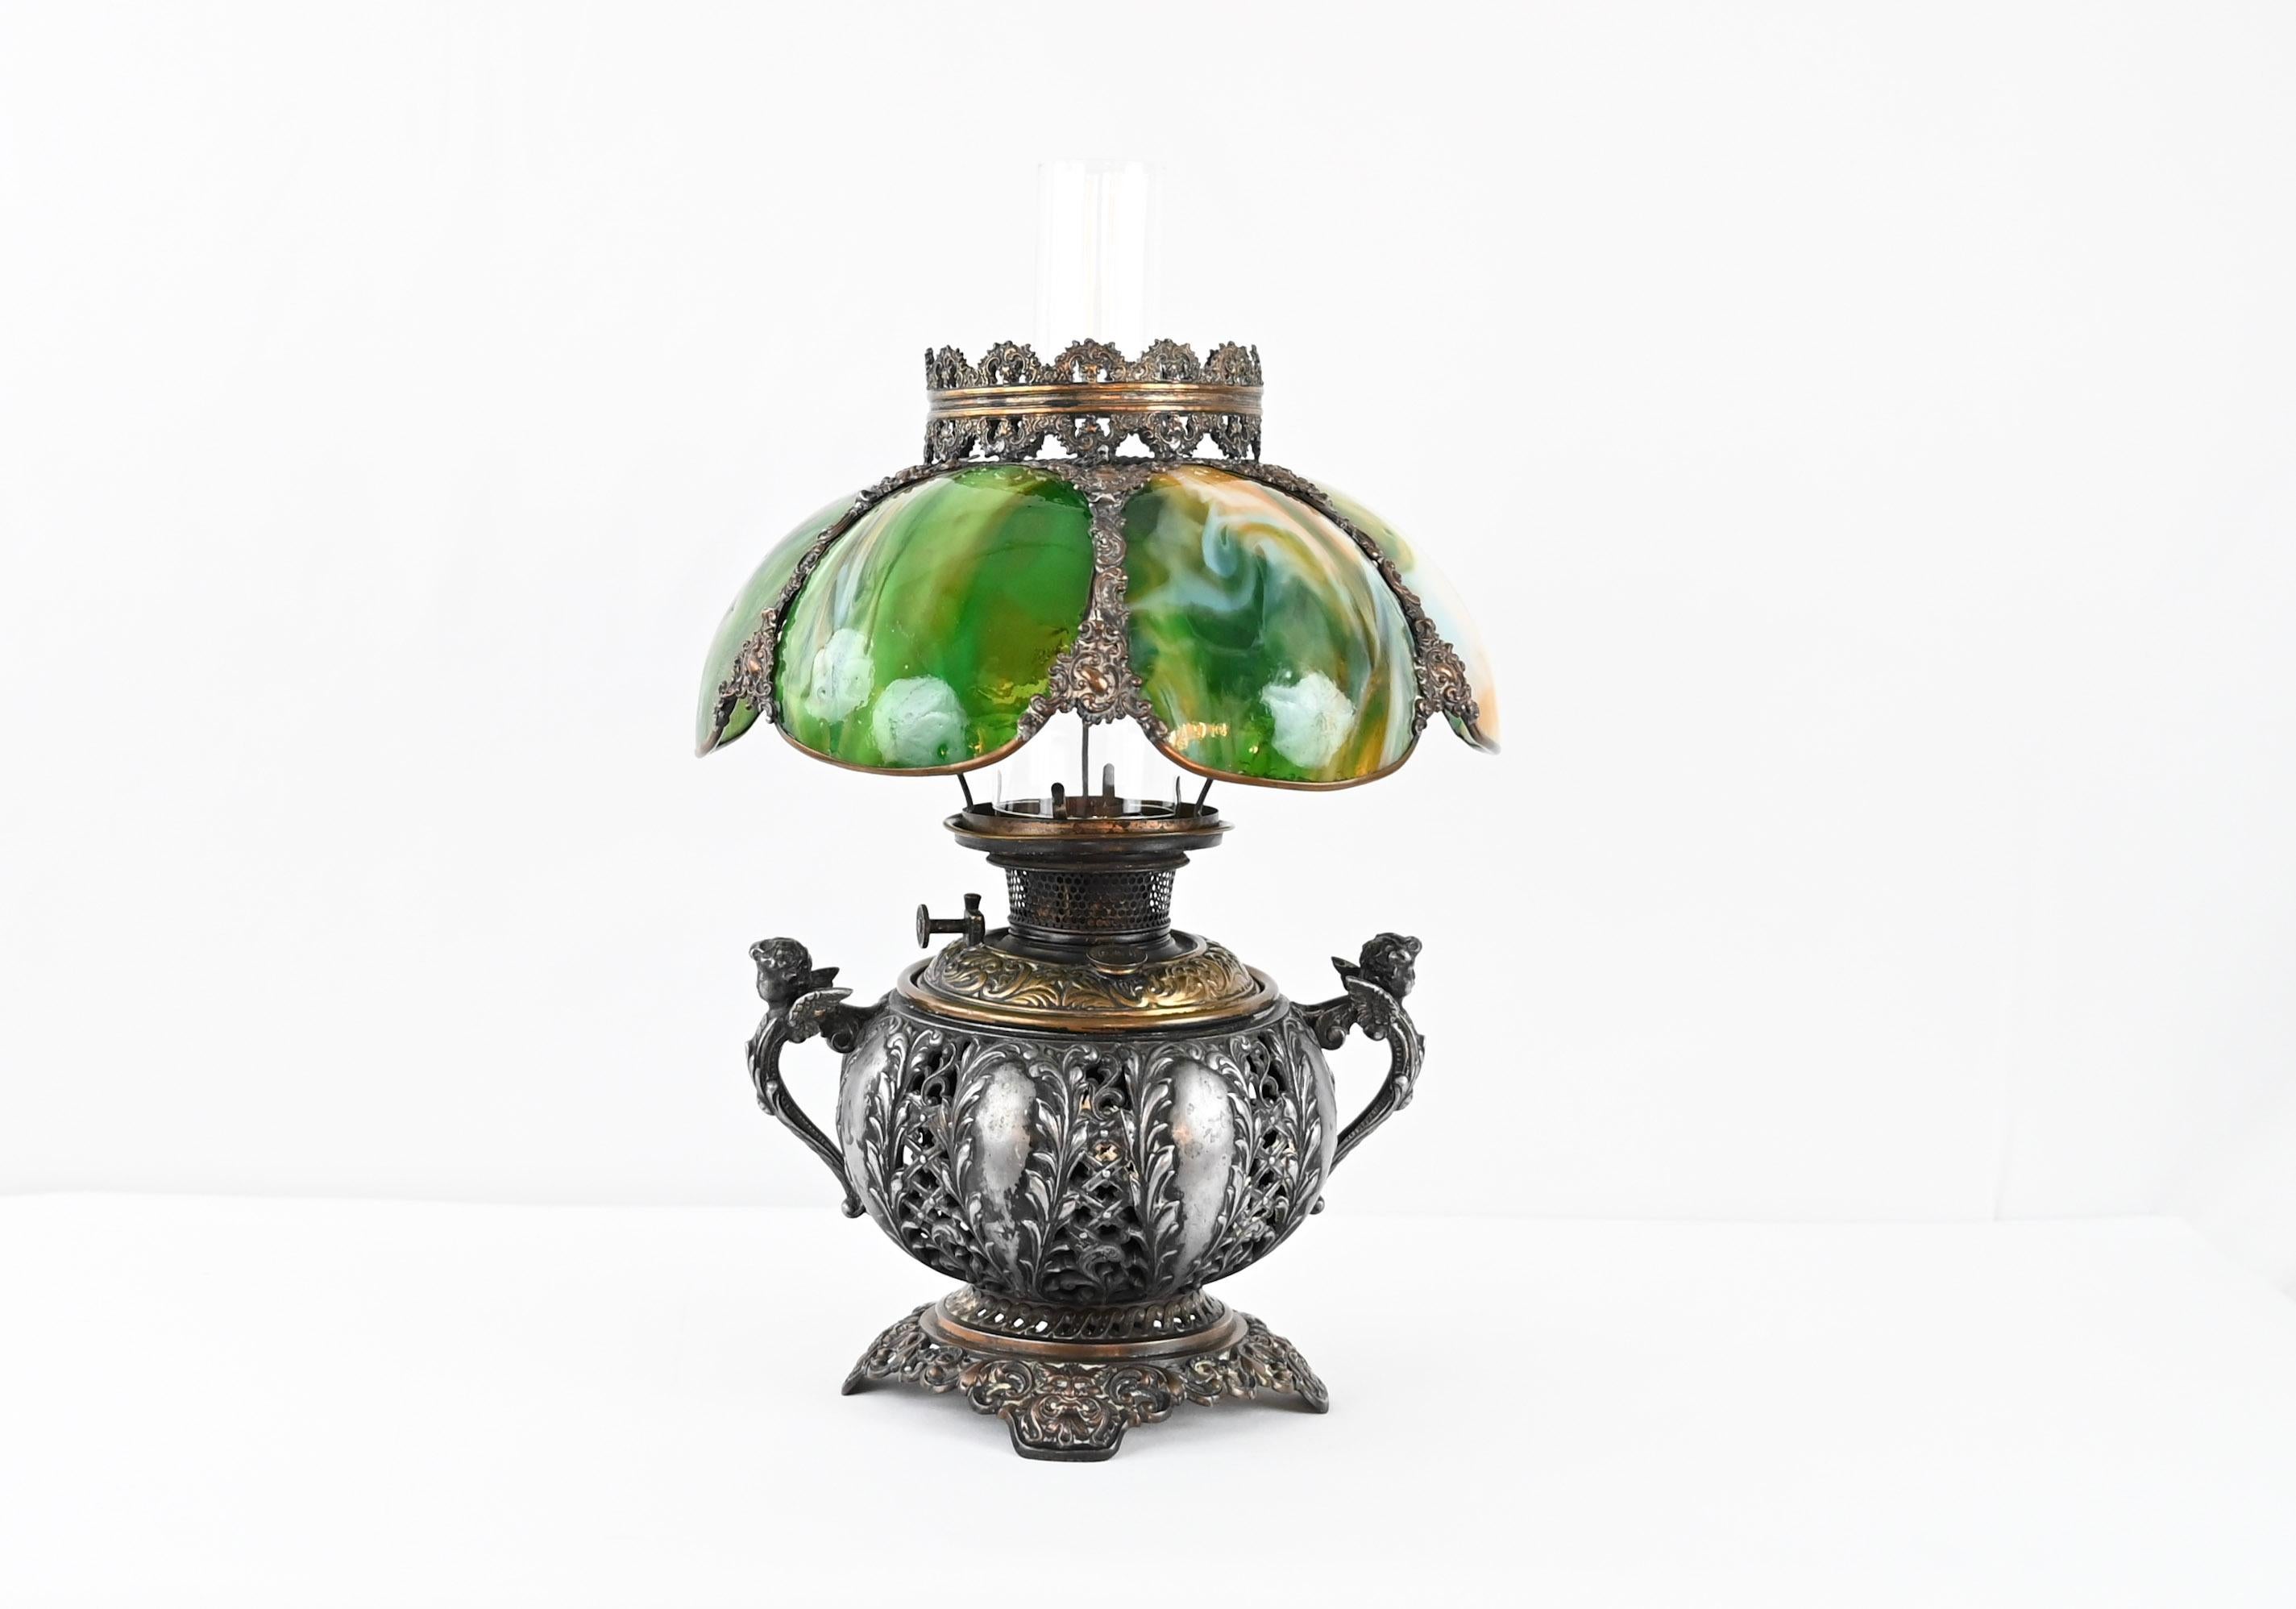 Antique Bradley & Hubbard oil lamp from 1885-1894, B&H engraved on the base. The lamp is made of antique brass and very ornate cast iron old-gold-gilded and beautiful detailing. Original hand painted glass shade with very elegant design on both